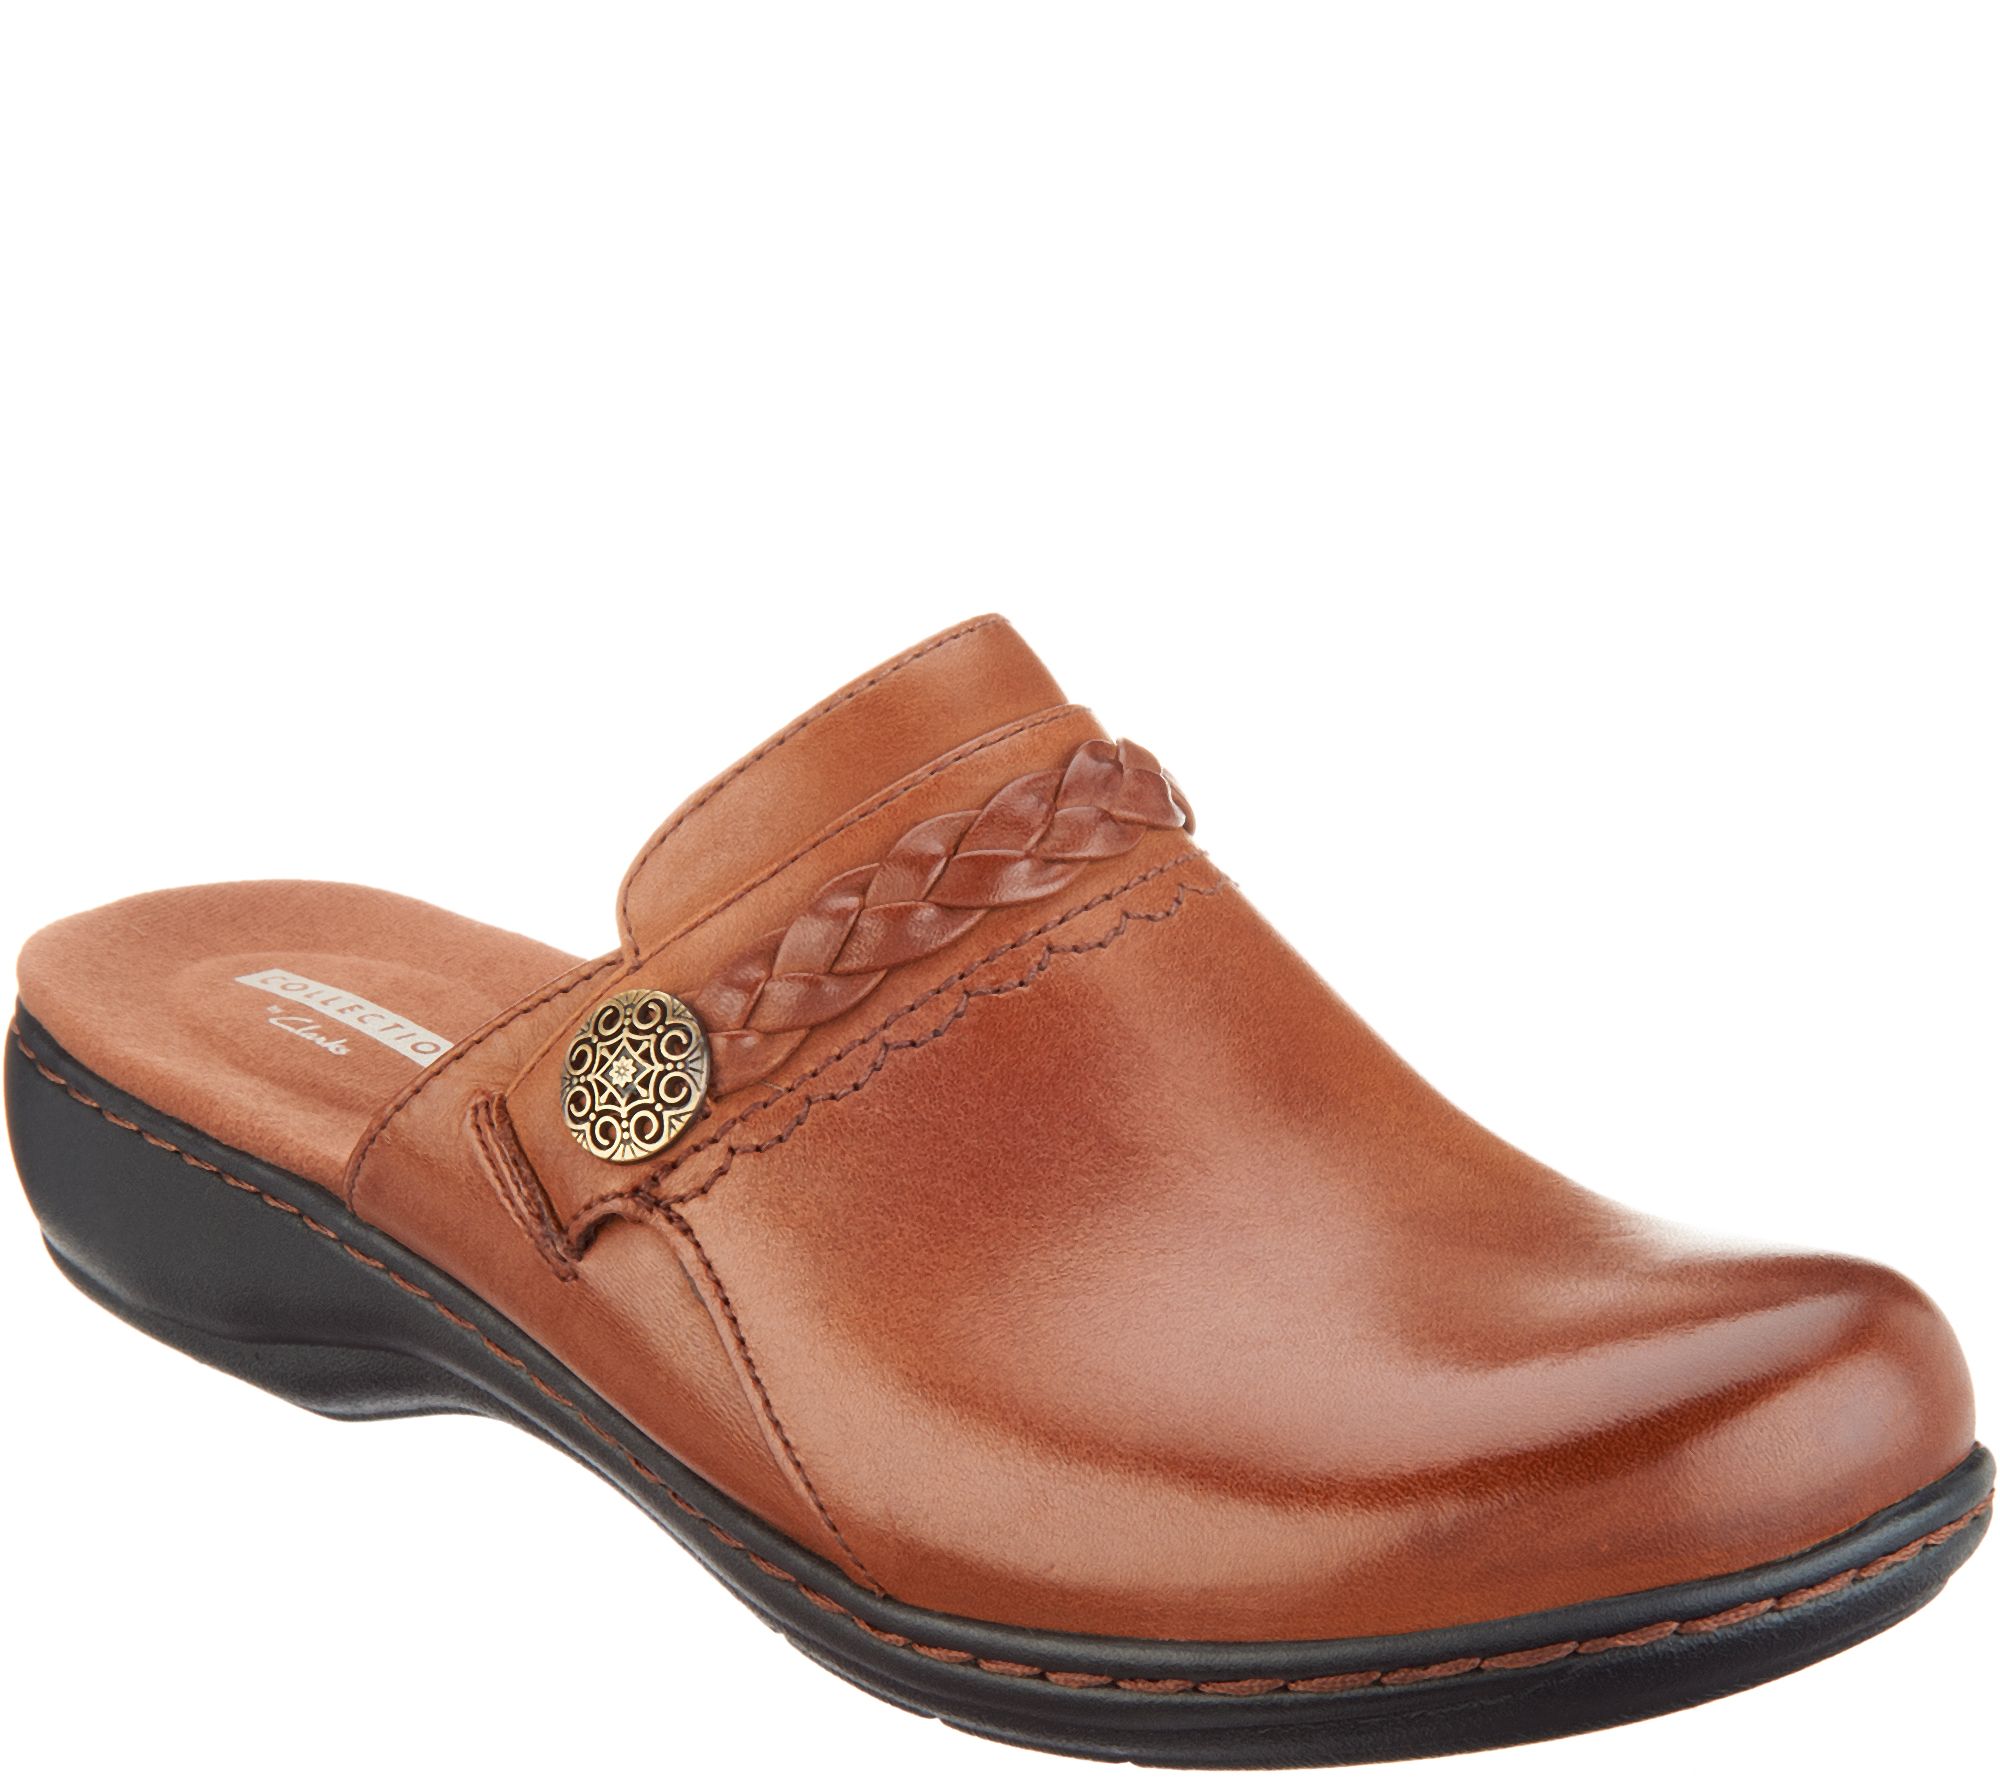 clarks leisa carly clogs